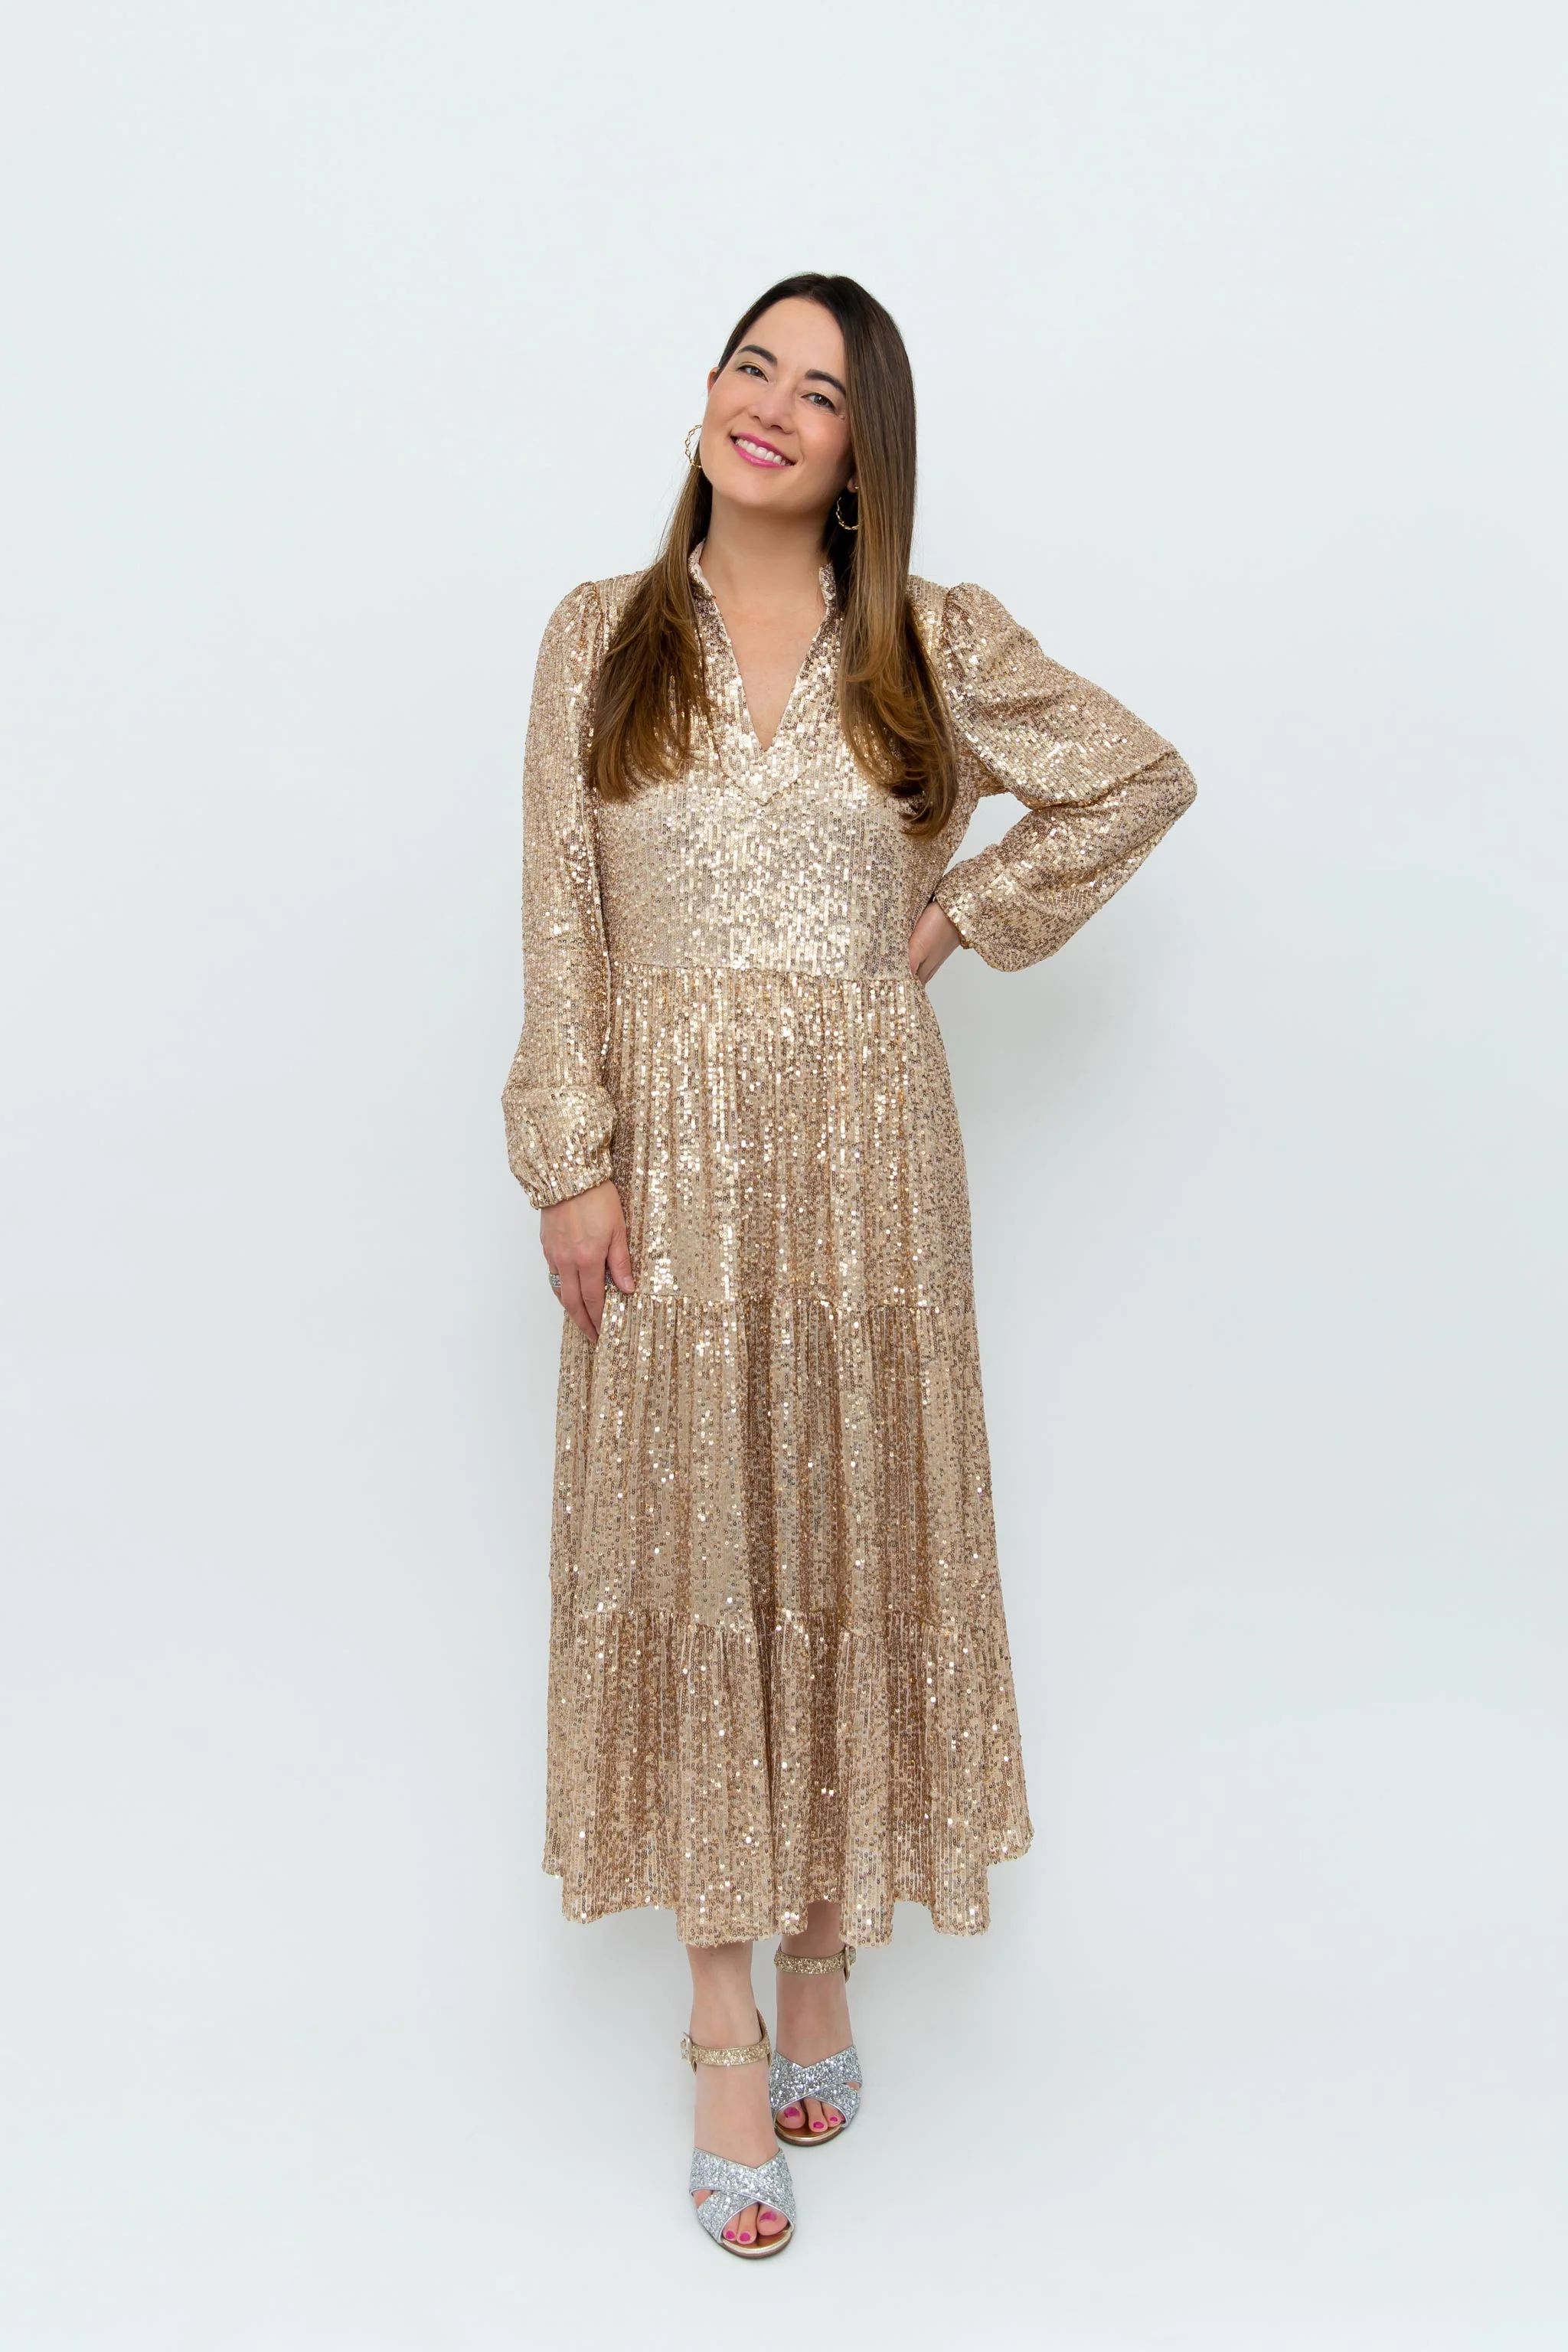 Anne Gold Sequin Dress | Sail to Sable